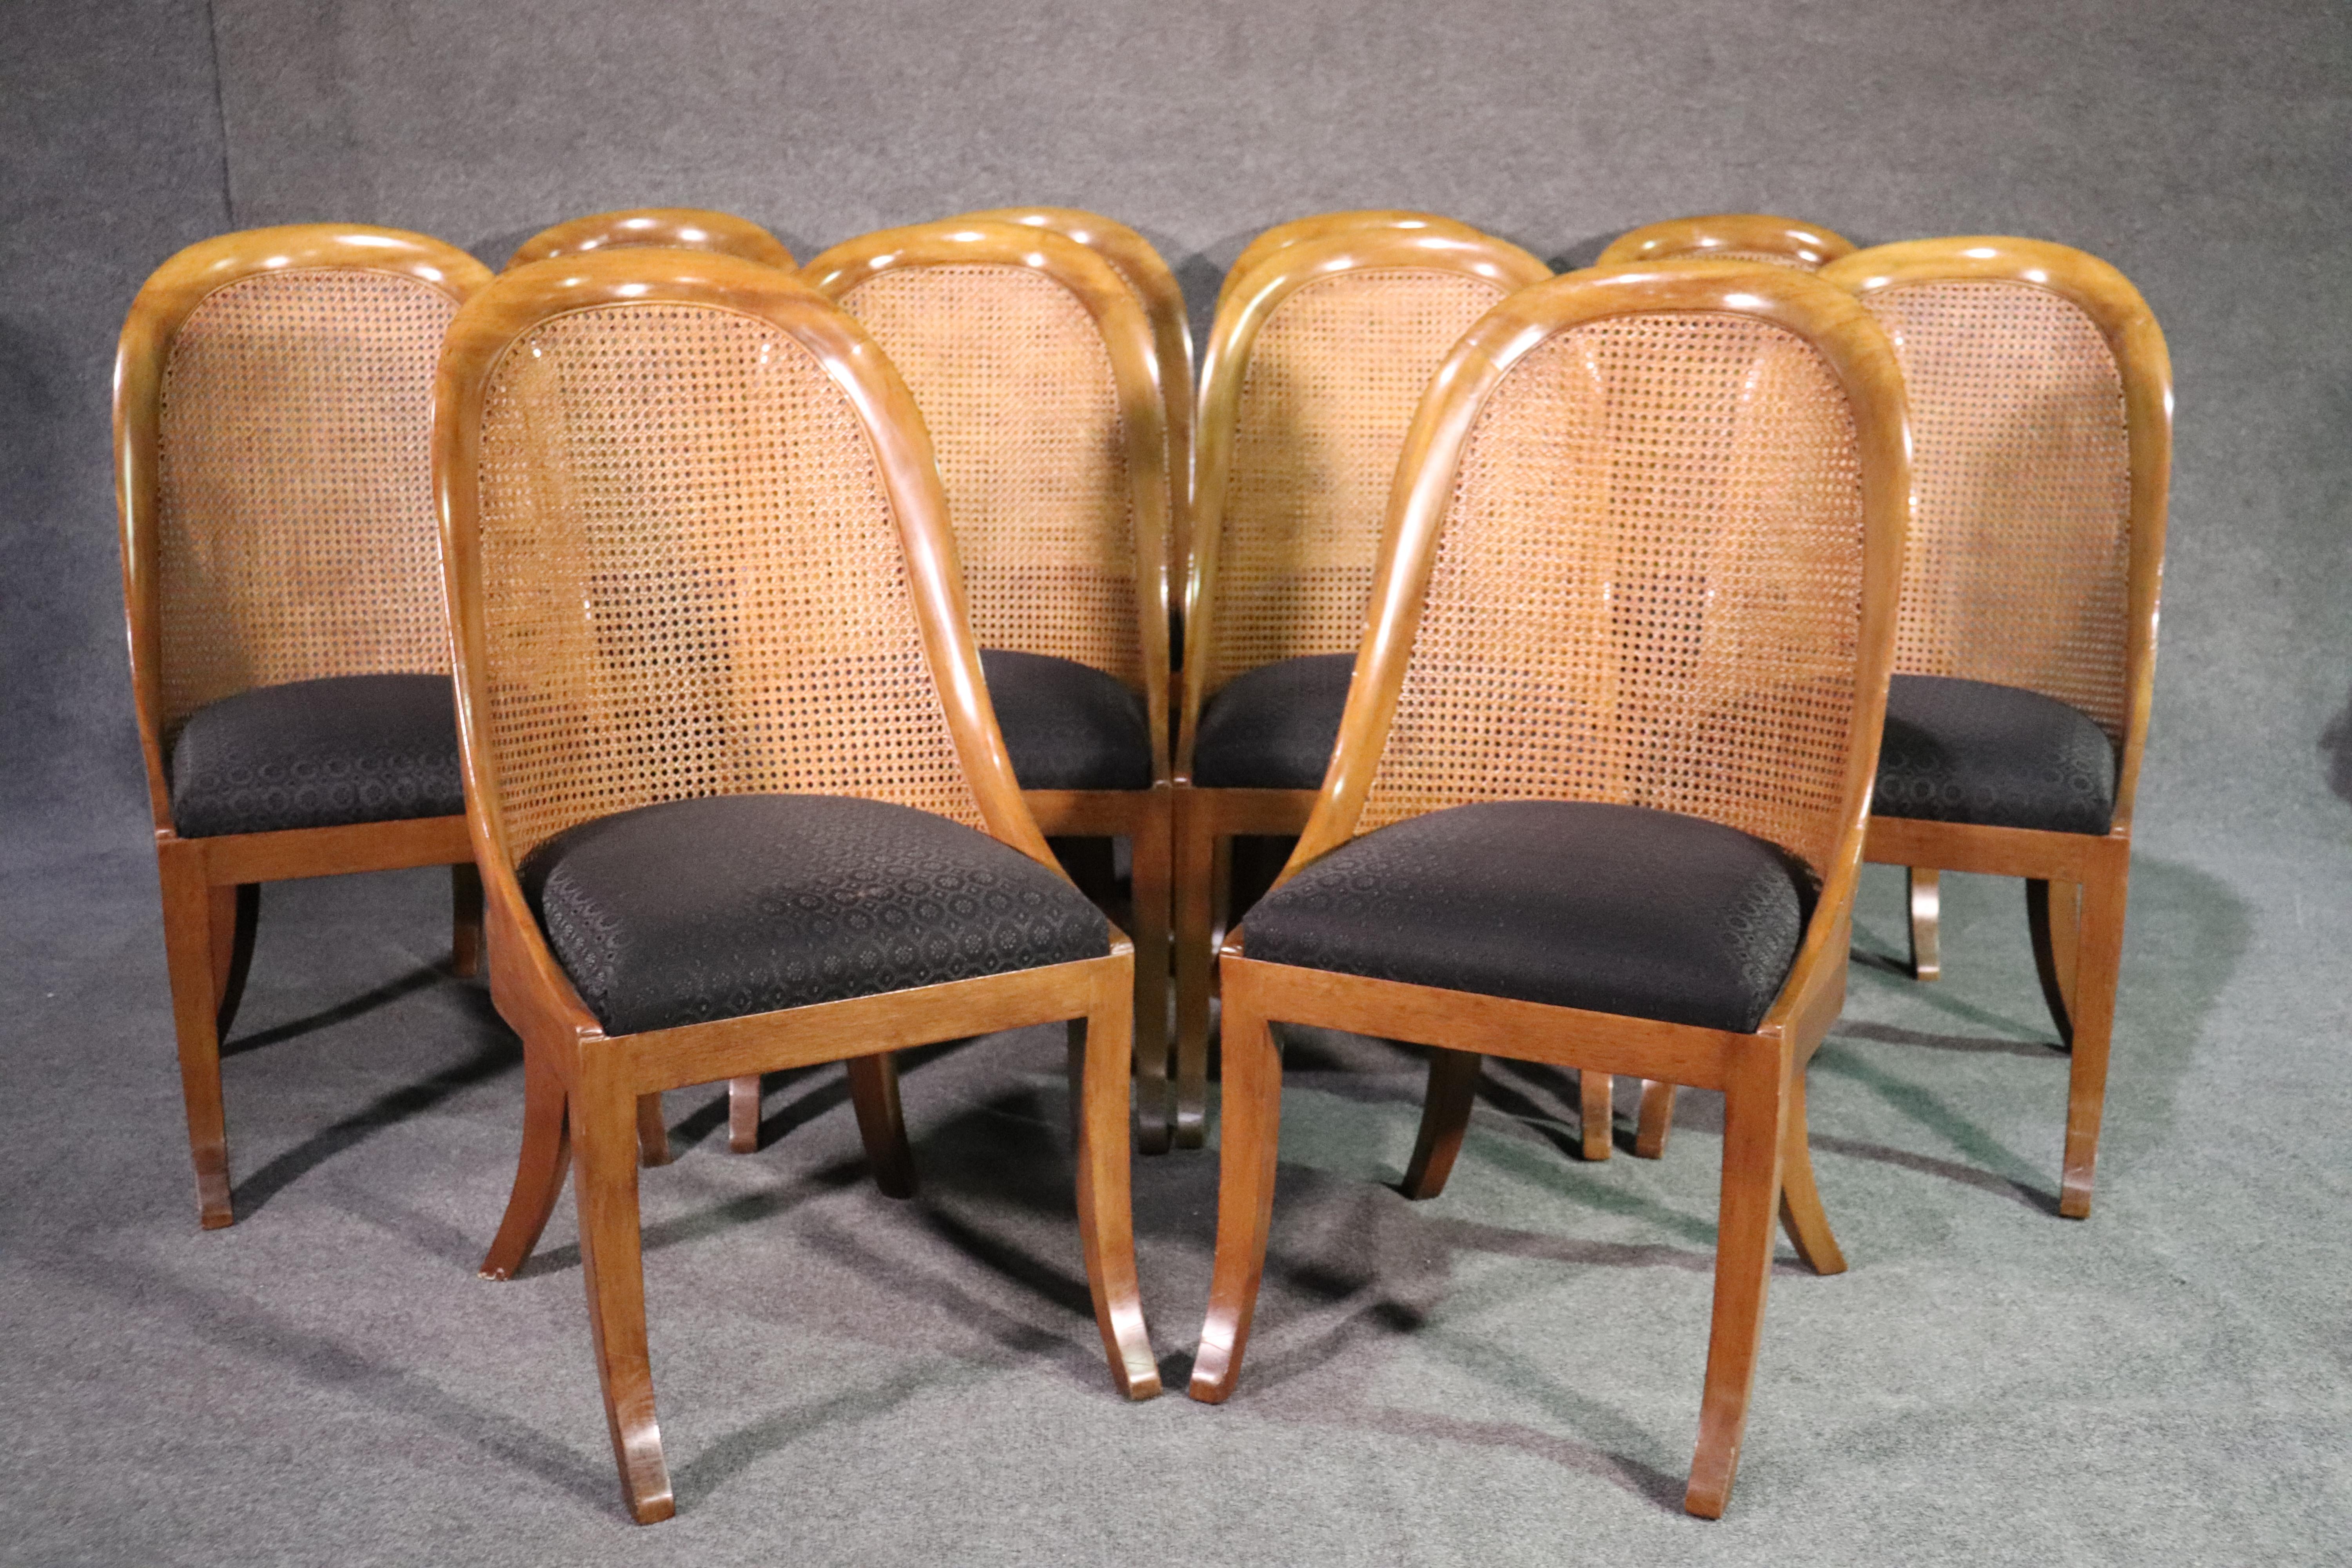 This is a fine set of 10 solid walnut dining chairs. They have the quality of Henredon or Baker but are not marked. The set is in good condition and has sleek lines and no major damage or issues at all. They date to the 1950s. They measure 41 tall x